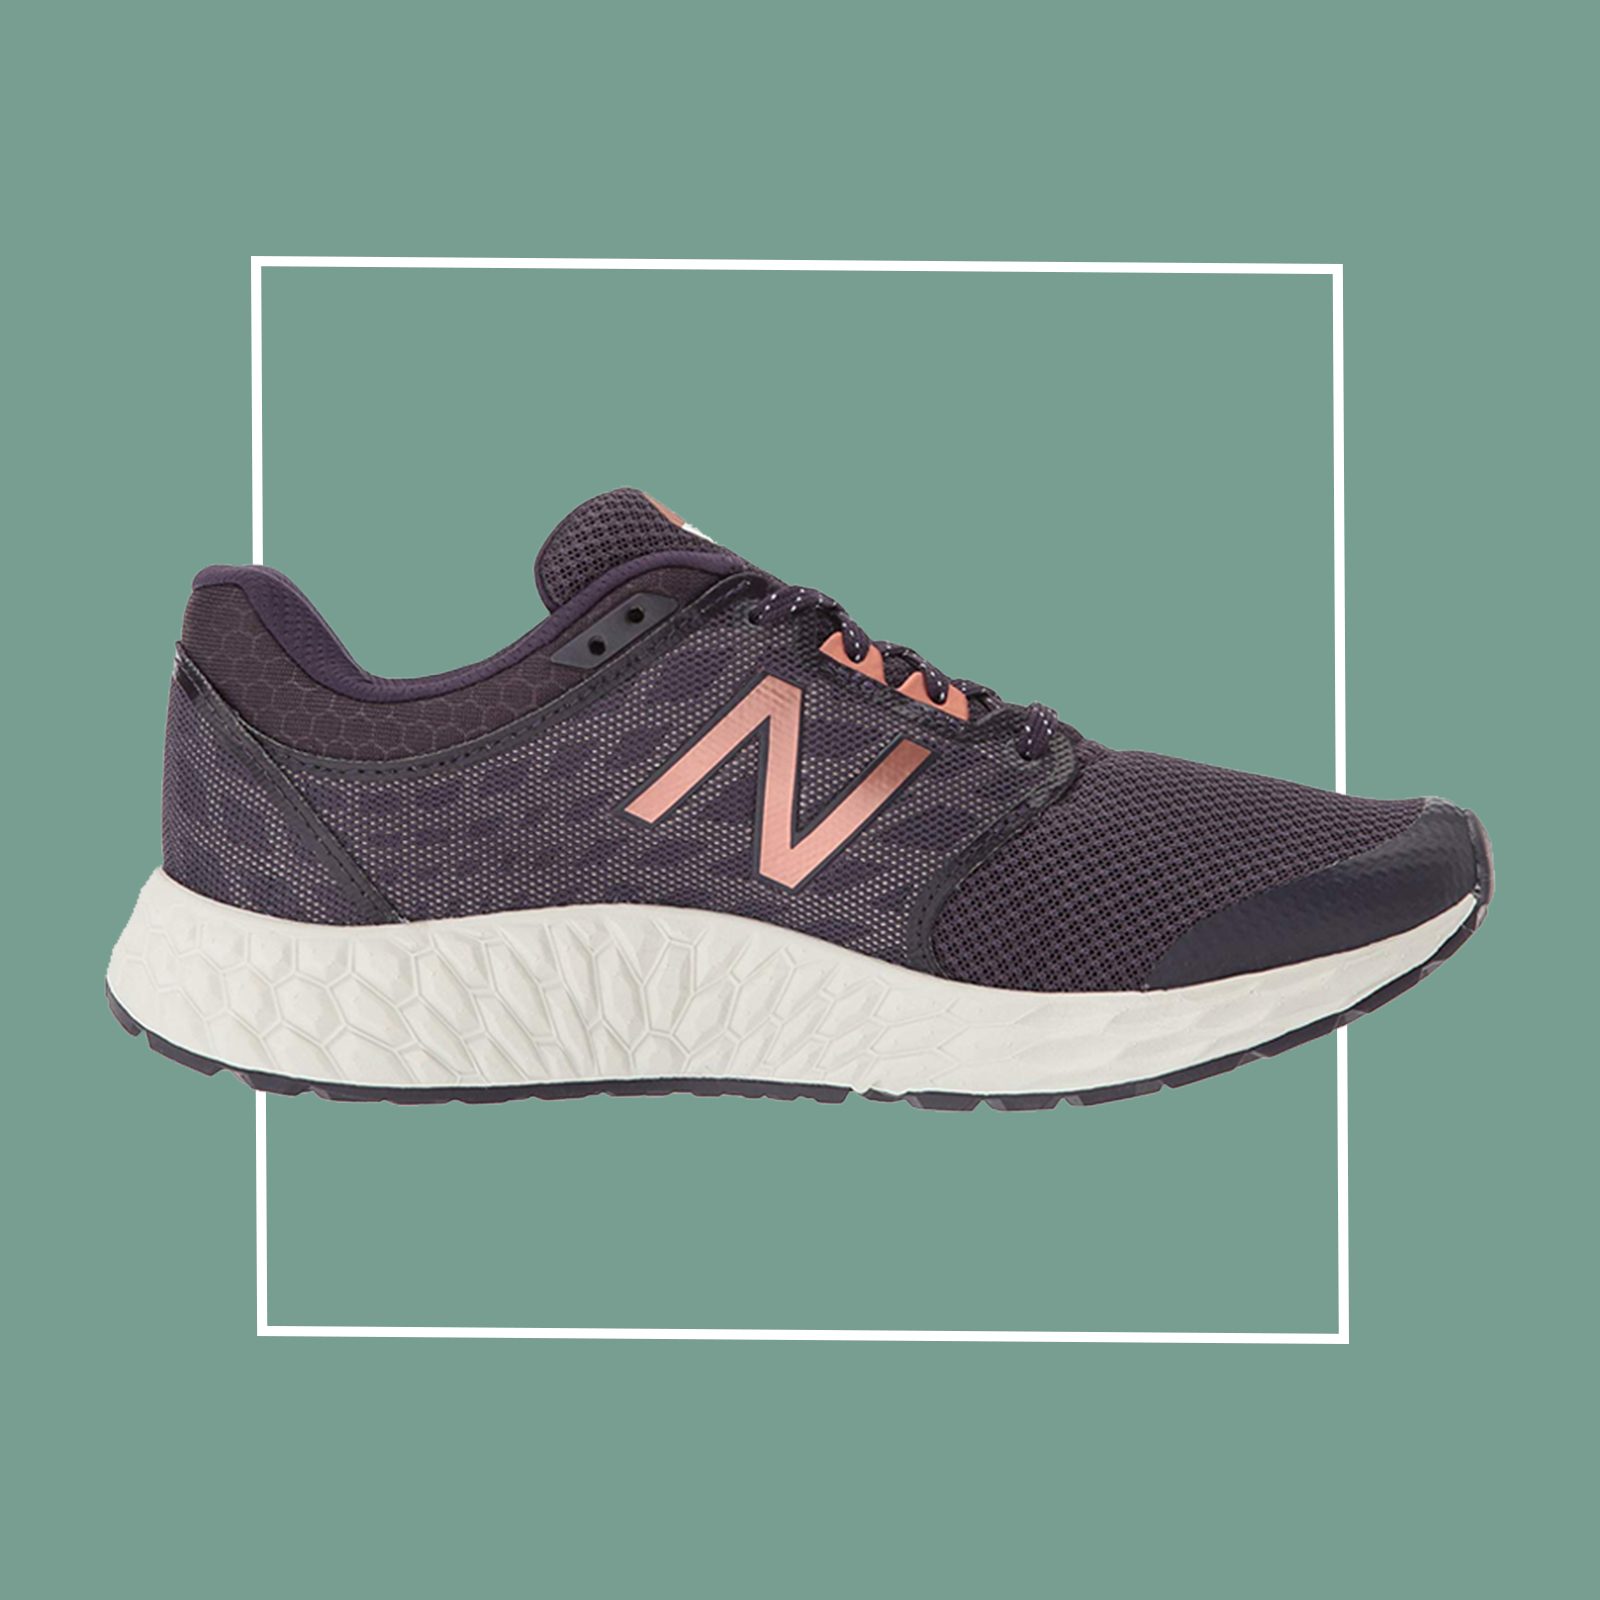 most supportive new balance shoe